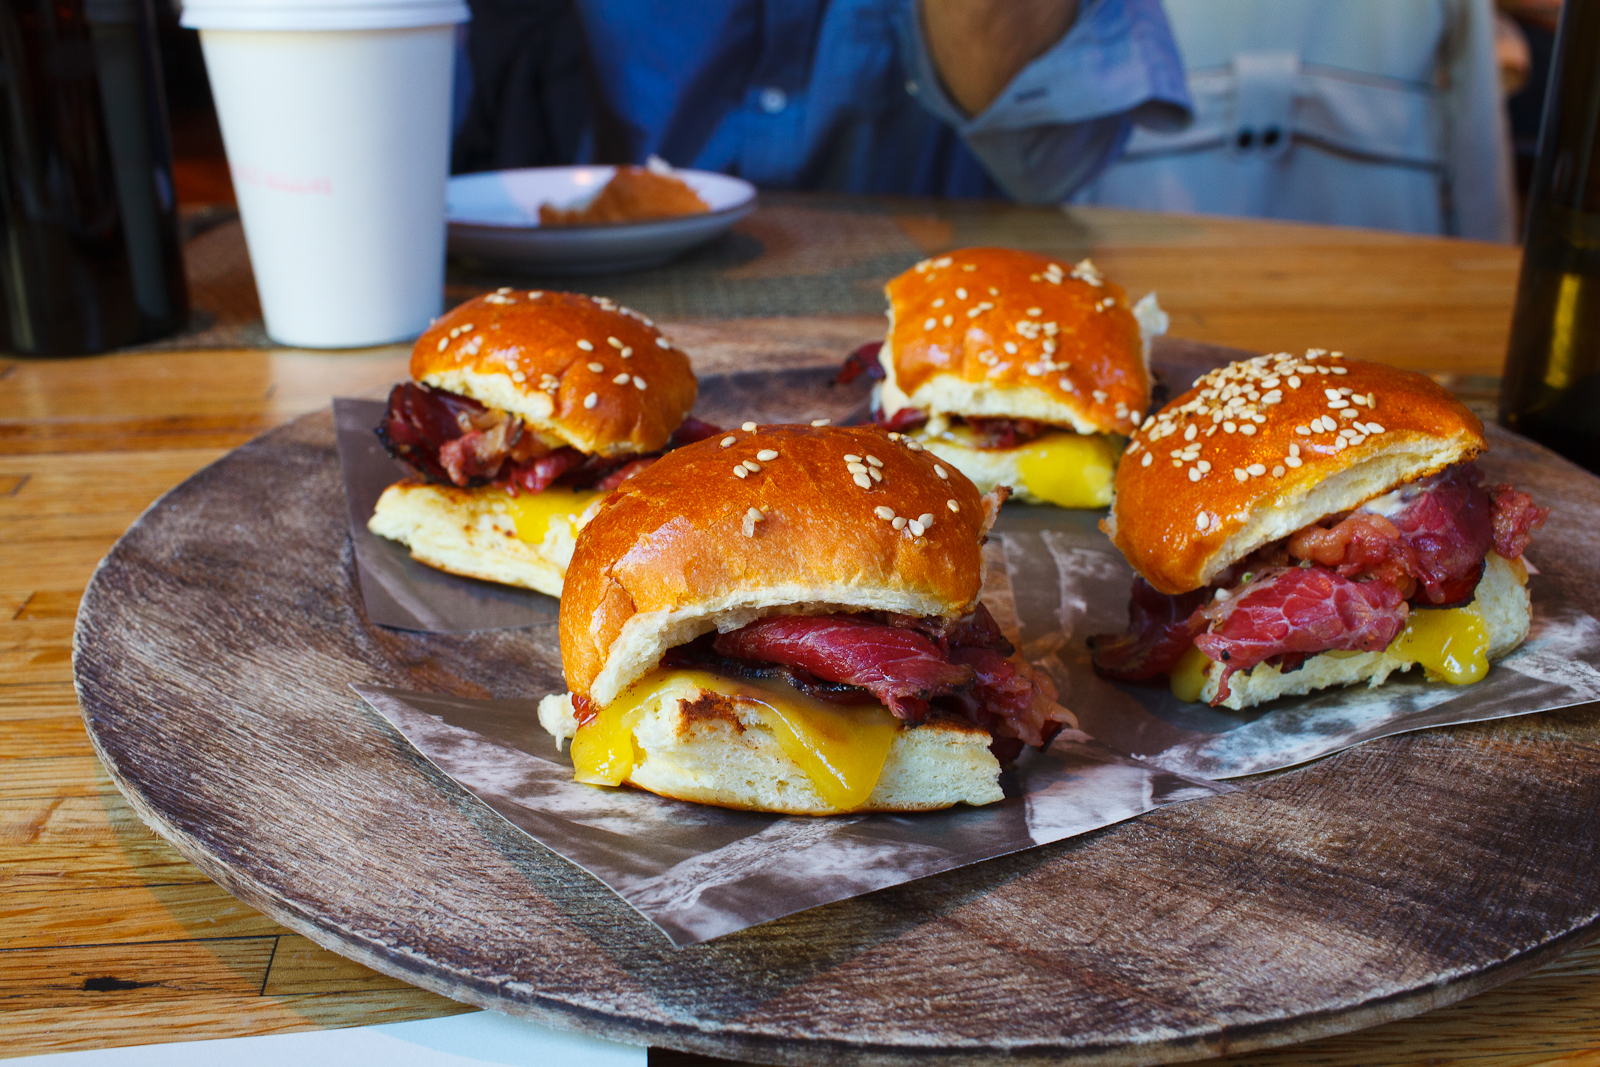 Slices of 45-day dry aged 3-day cured beef with a garlic and black pepper crust smoked for 16-hours on a benne buttermilk bun, cheese, tomato aïoli, garlic